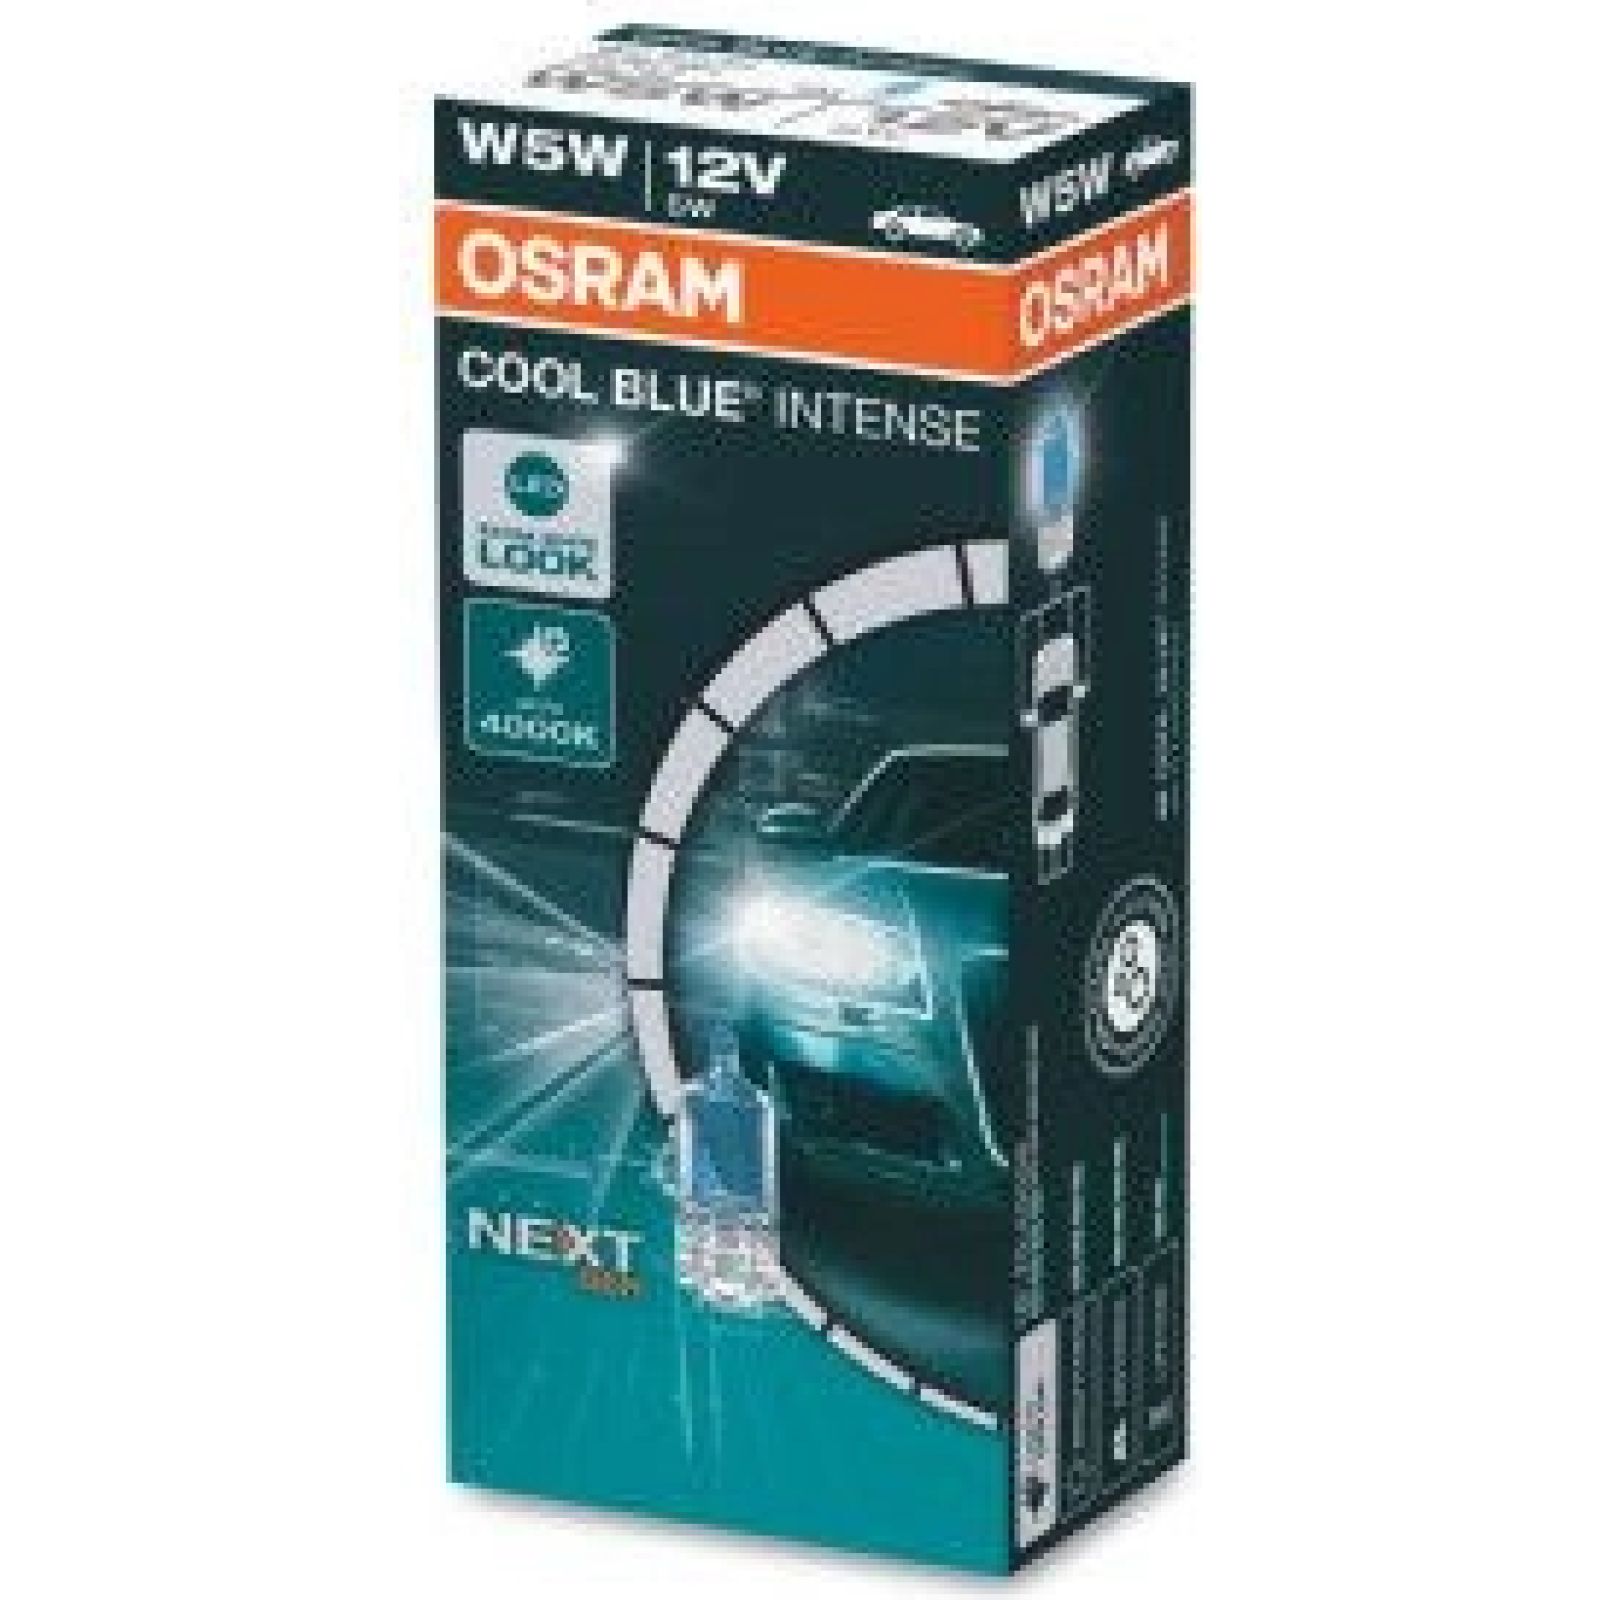 https://www.autoteile-store.at/img/product/w5w-osram-12v-w21x95d-cbn-cool-blue-intense-next-gen-cool-blue-r-intense-next-gen-2825cbn-200322/f1cbcf4efe9f656ac533848f984b859a_1600.jpg